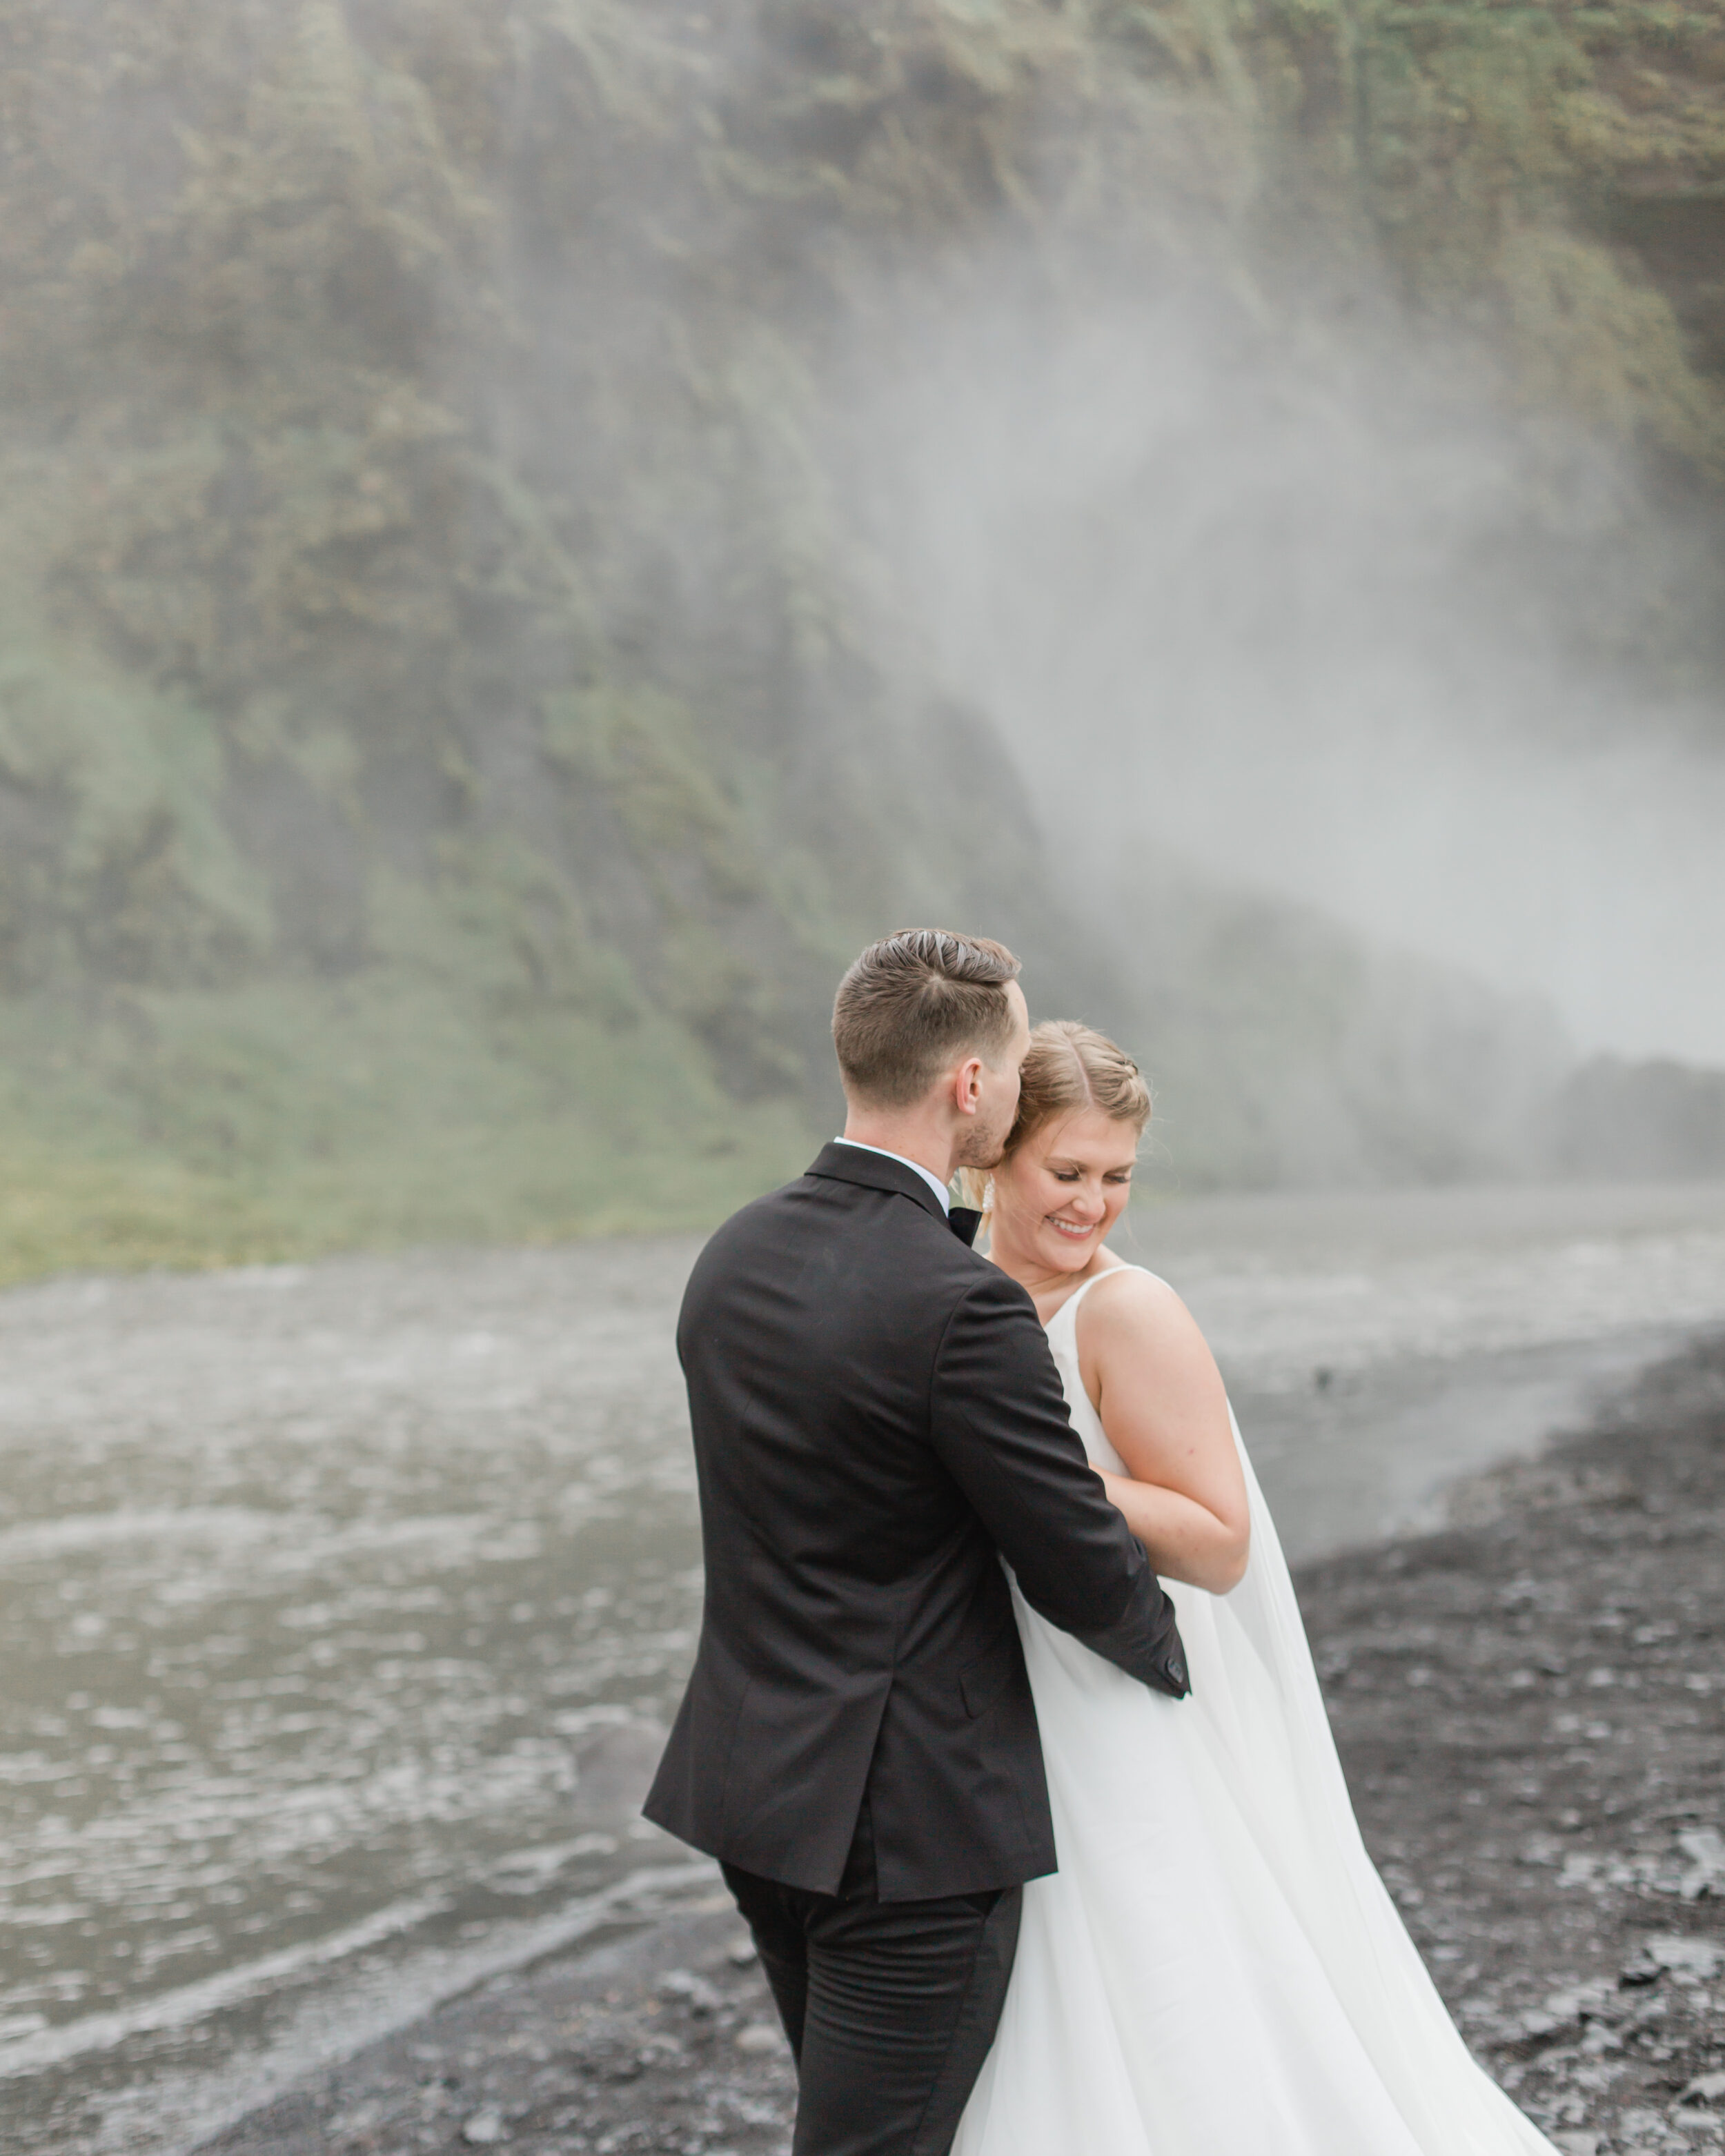 A groom kisses his brides forehead near a chilly Icelandic stream.